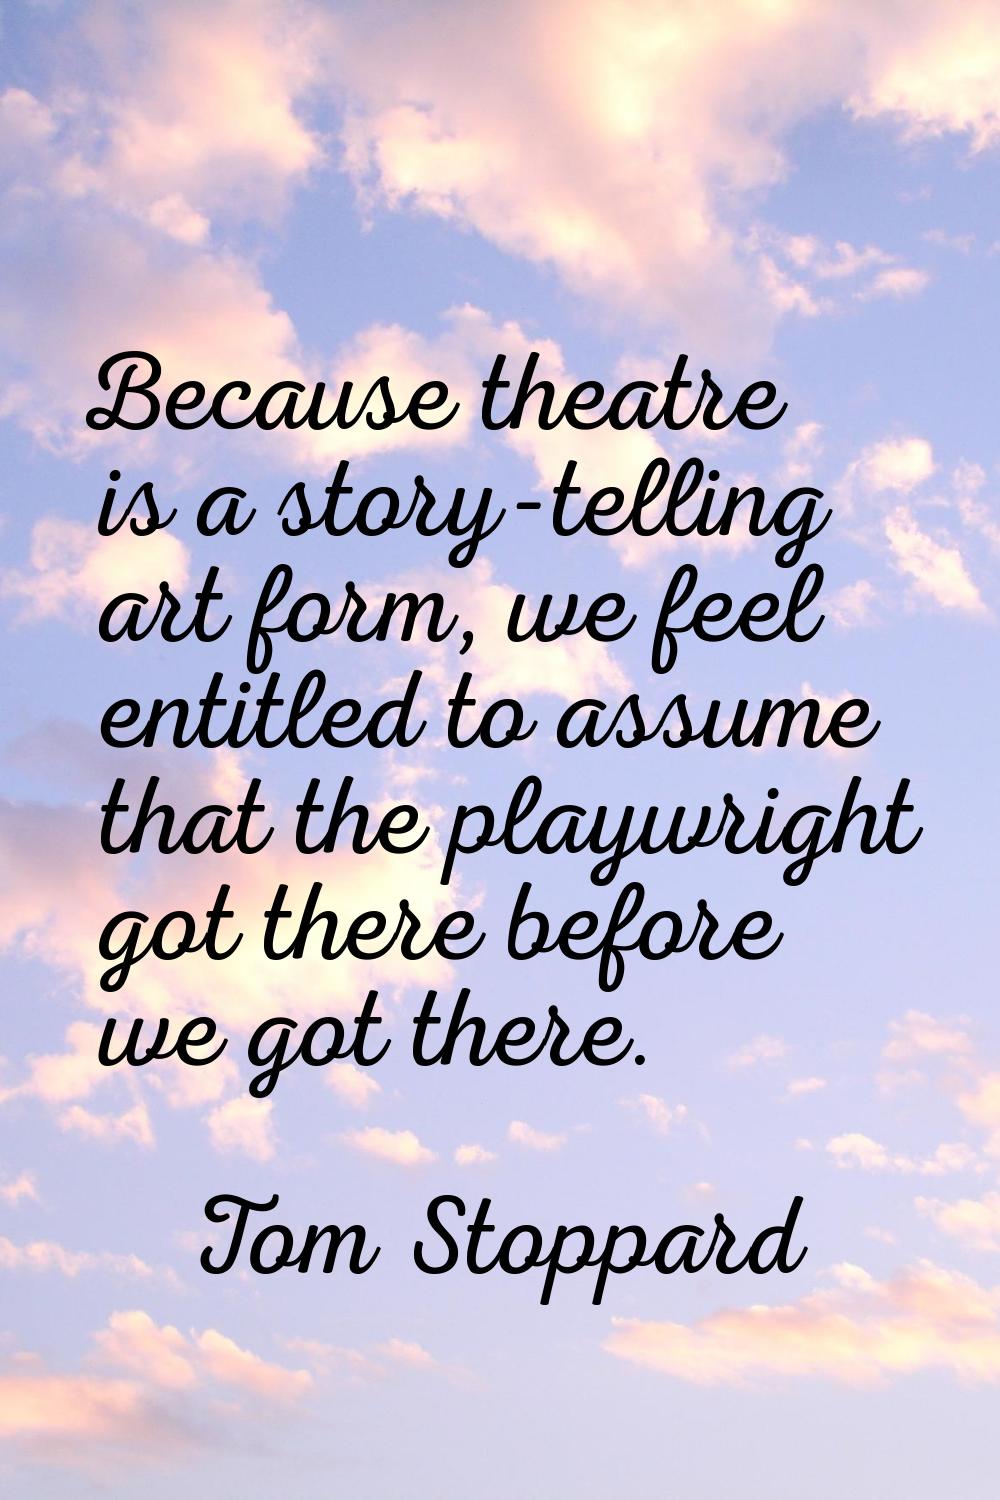 Because theatre is a story-telling art form, we feel entitled to assume that the playwright got the